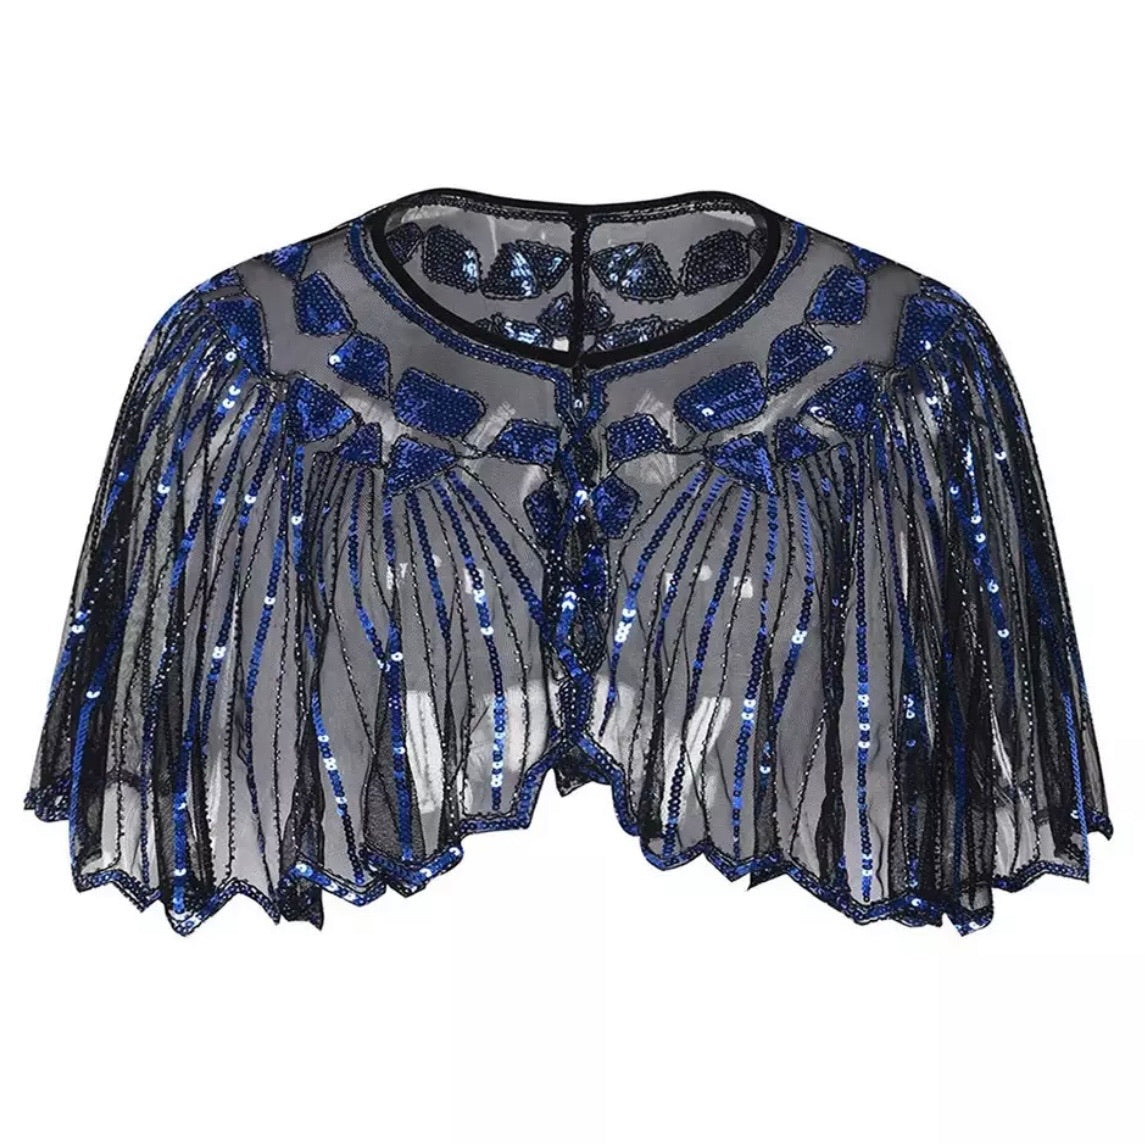 Great Gatsby 1920's Bridal Flapper Sequin Cape - Royal Blue